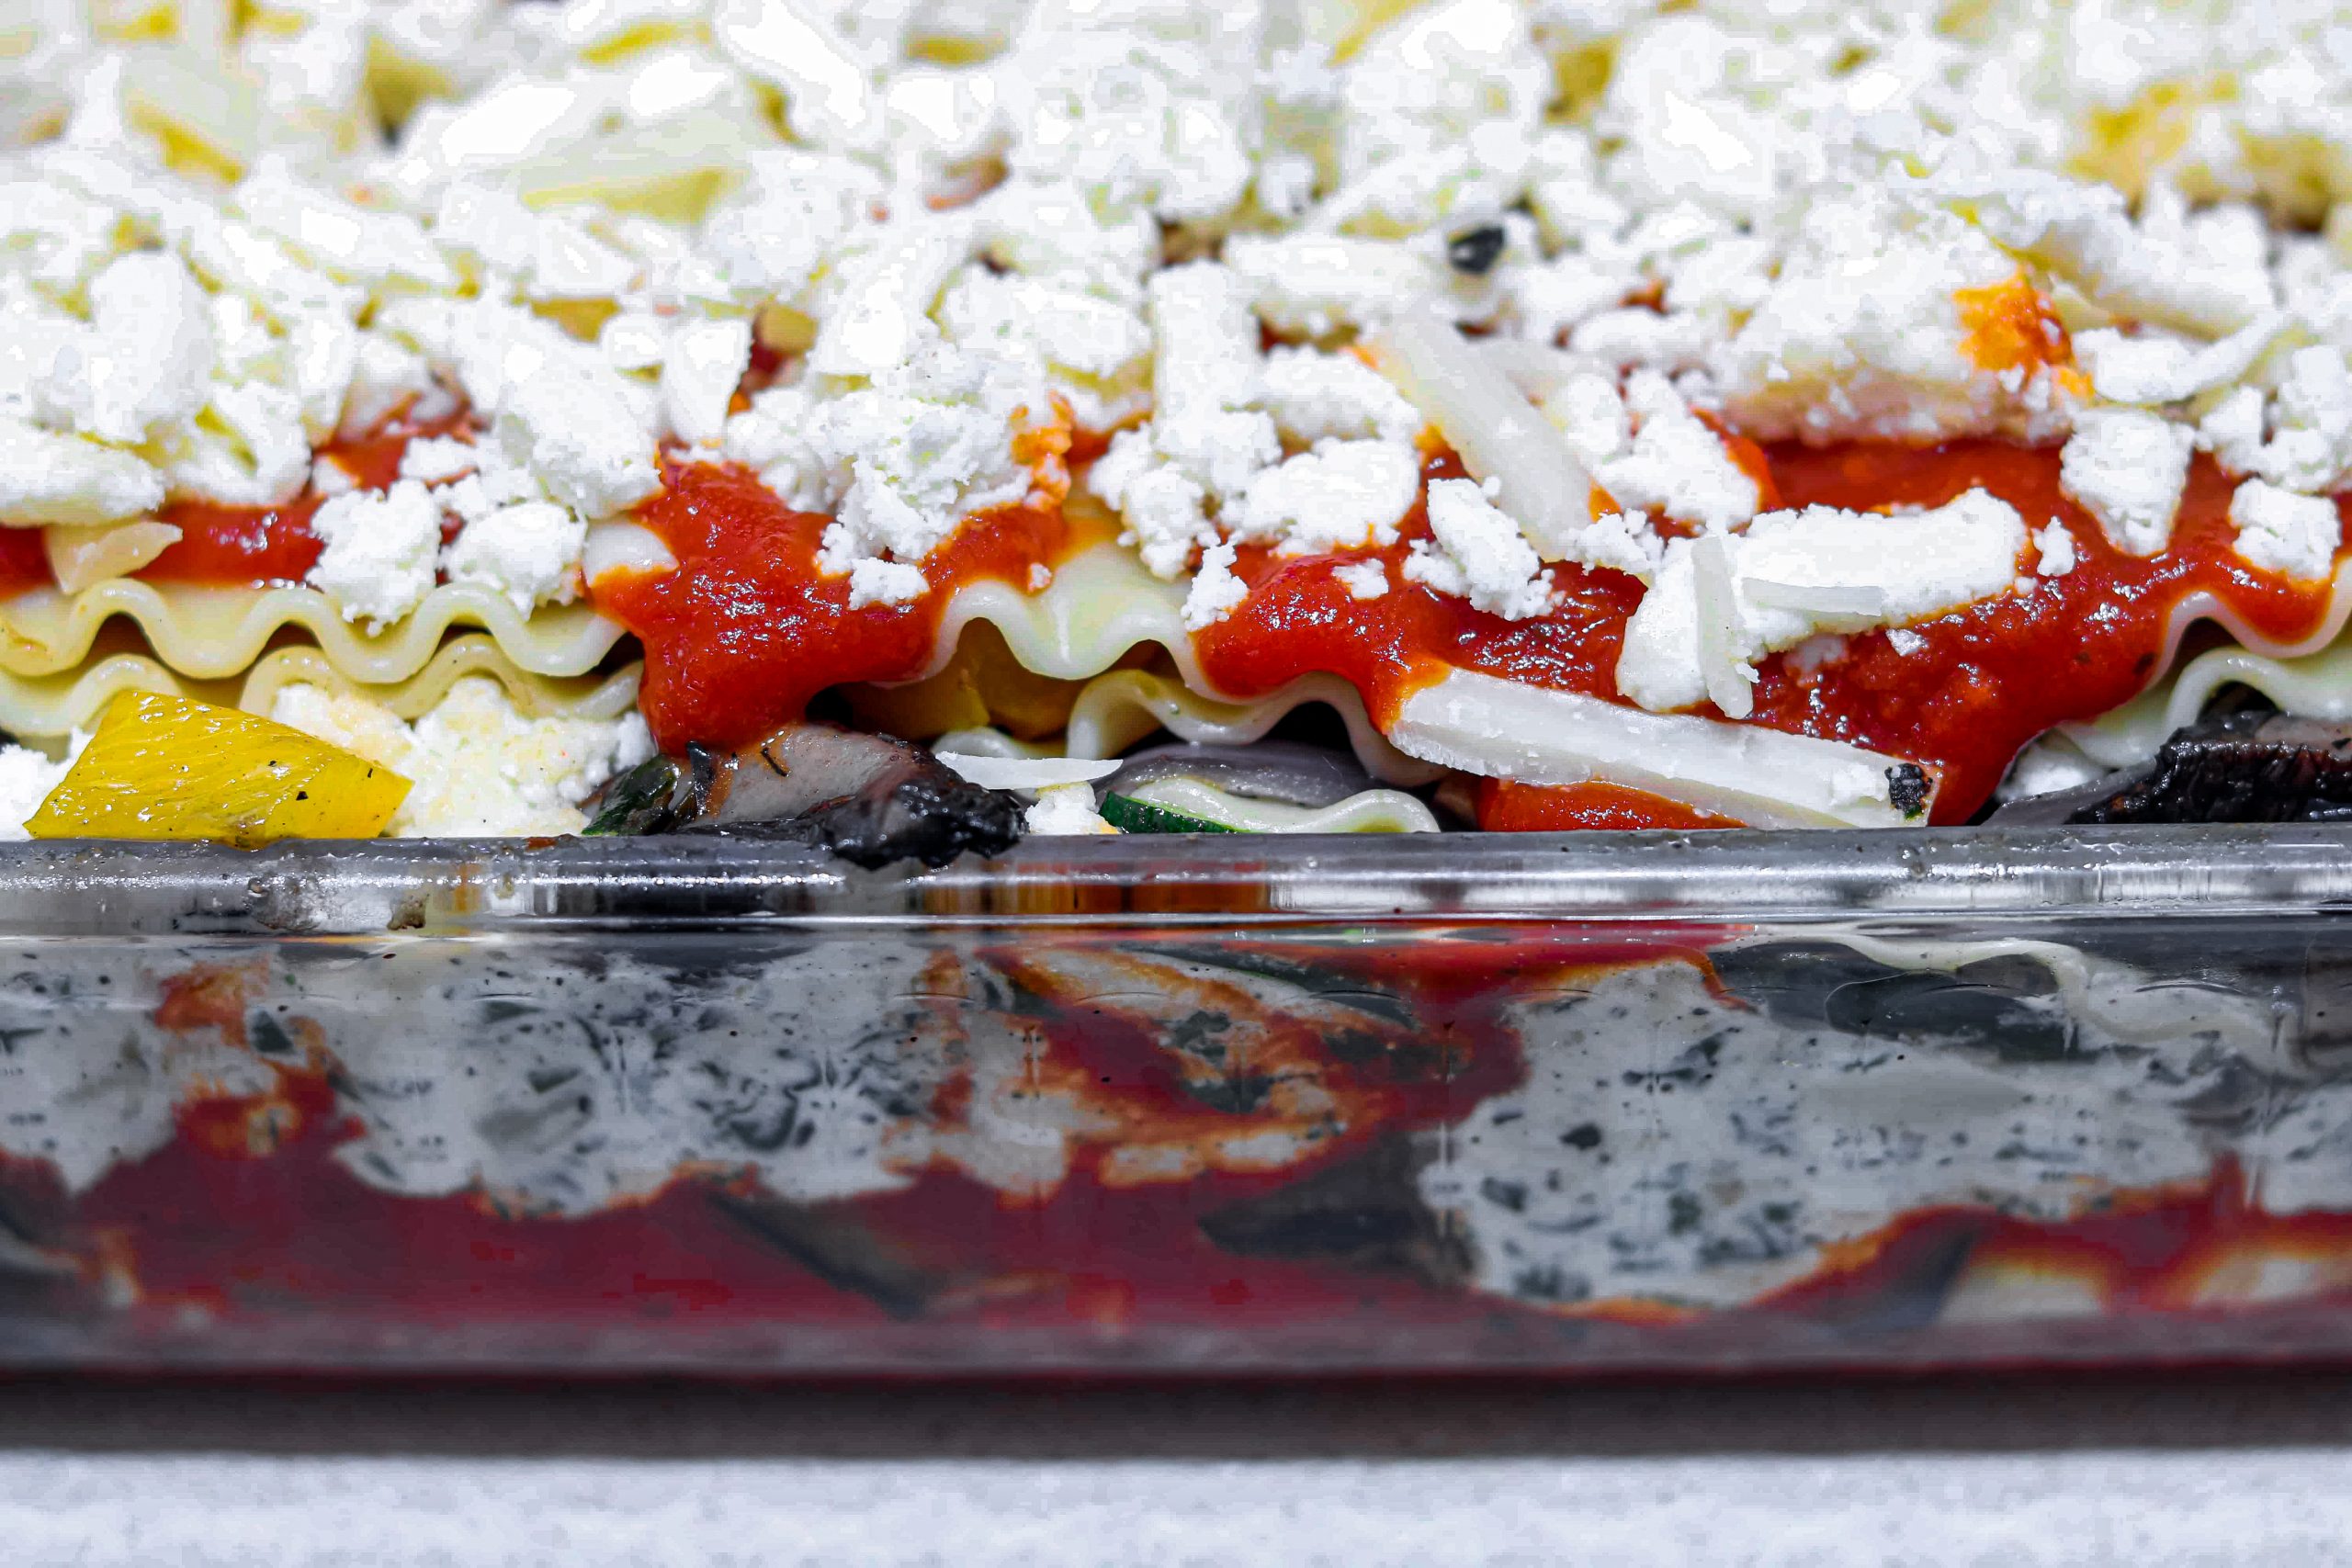 Layer all grilled veggies in a pan with cooked lasagna noodles, sauce, ricotta, and cheese. Bake. Serve hot.